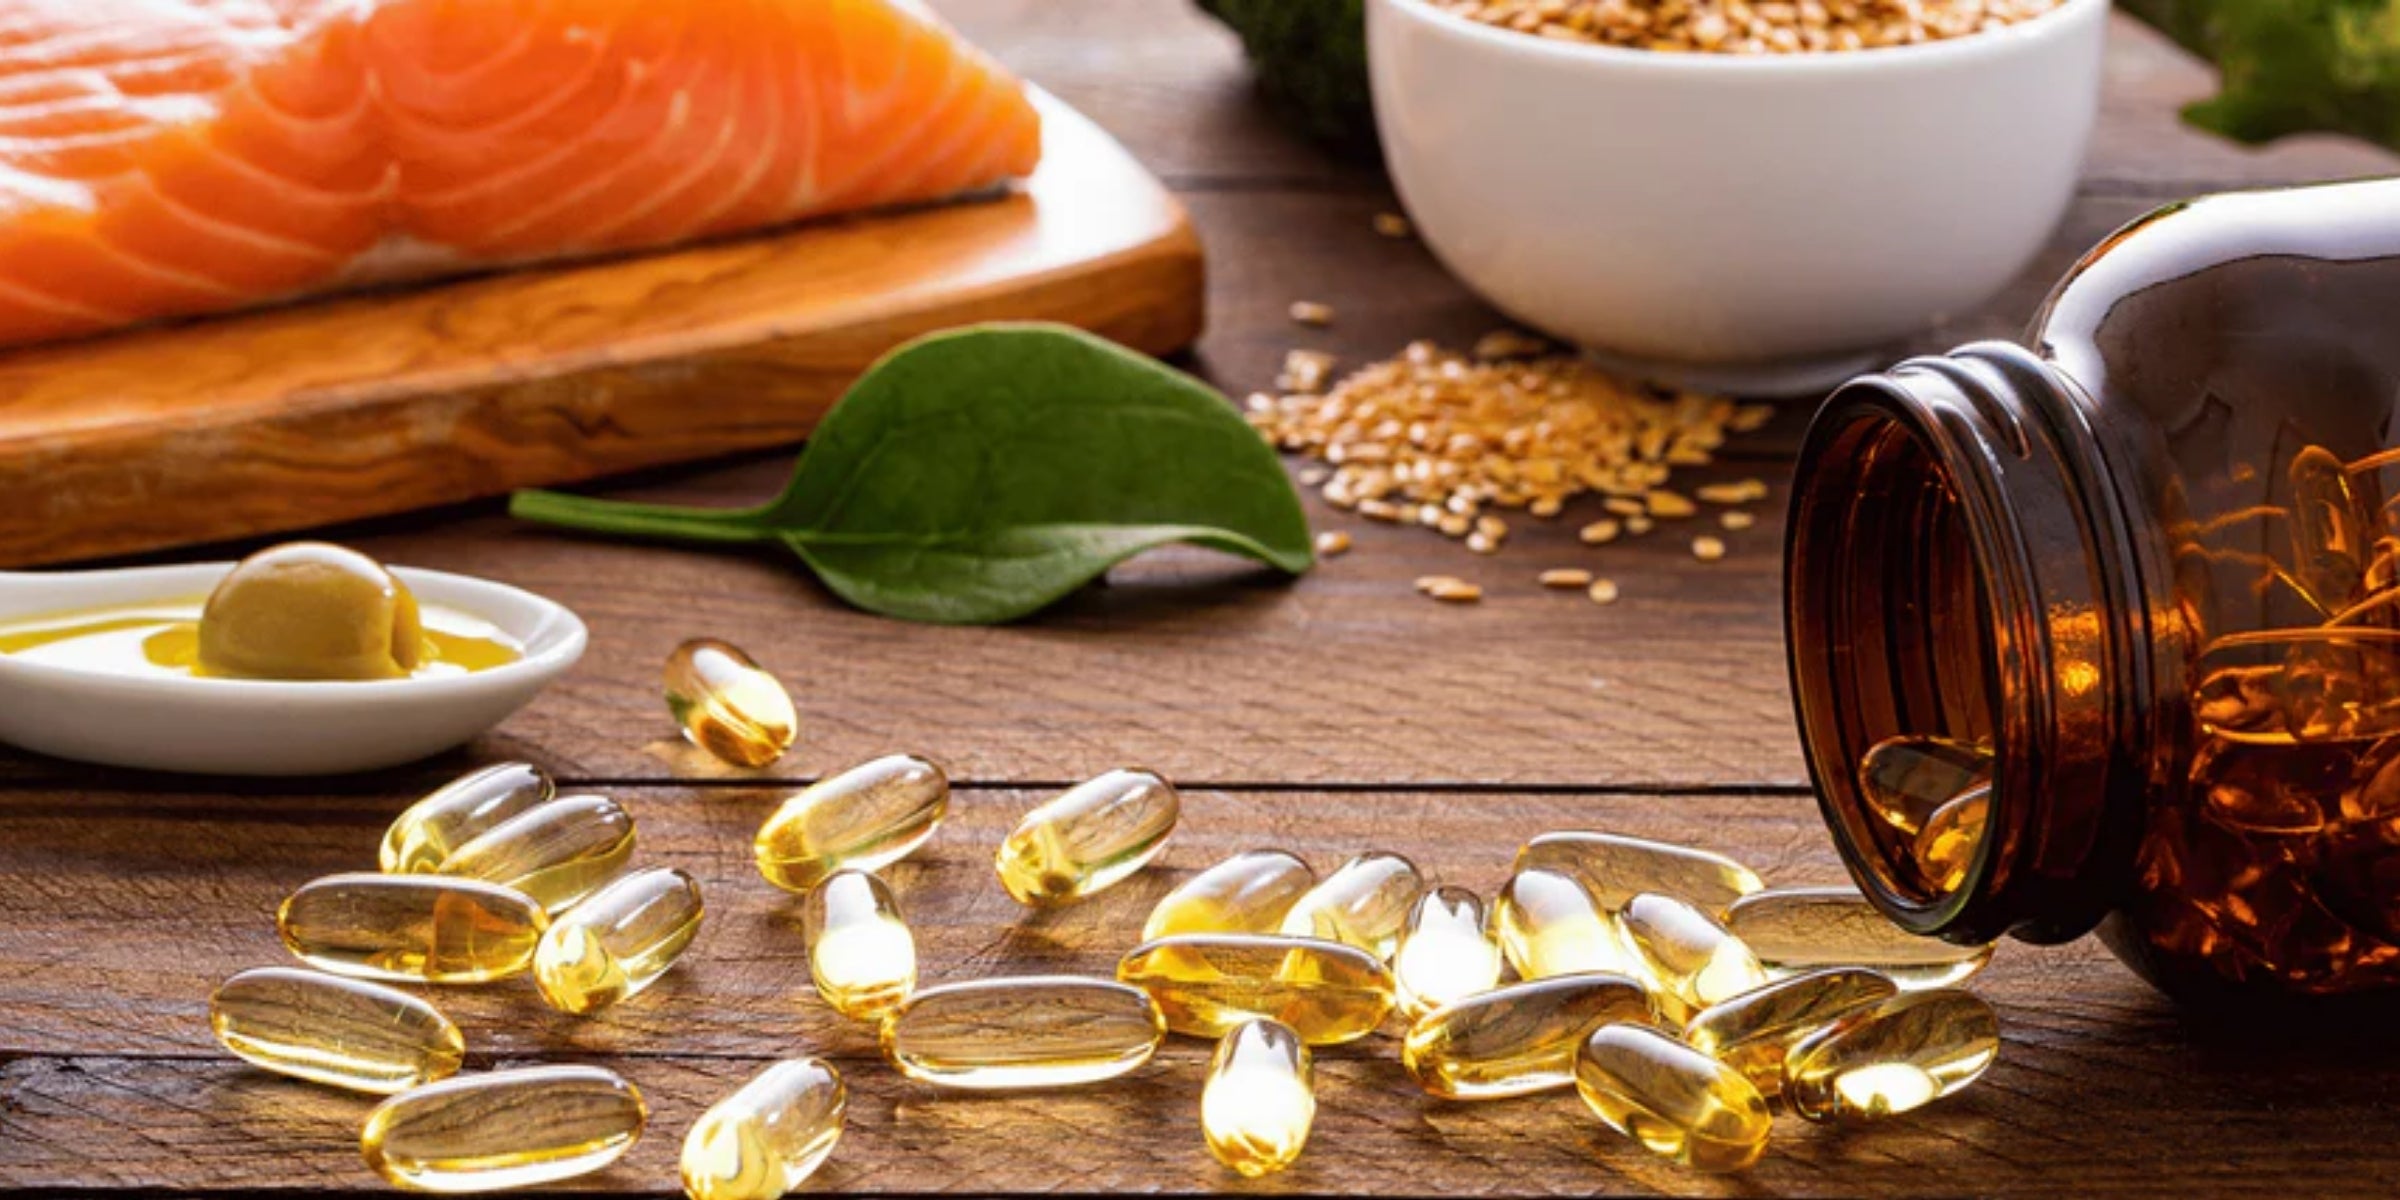  a variety of food items and supplements rich in omega-3 fatty acids, emphasizing a healthy dietary choice